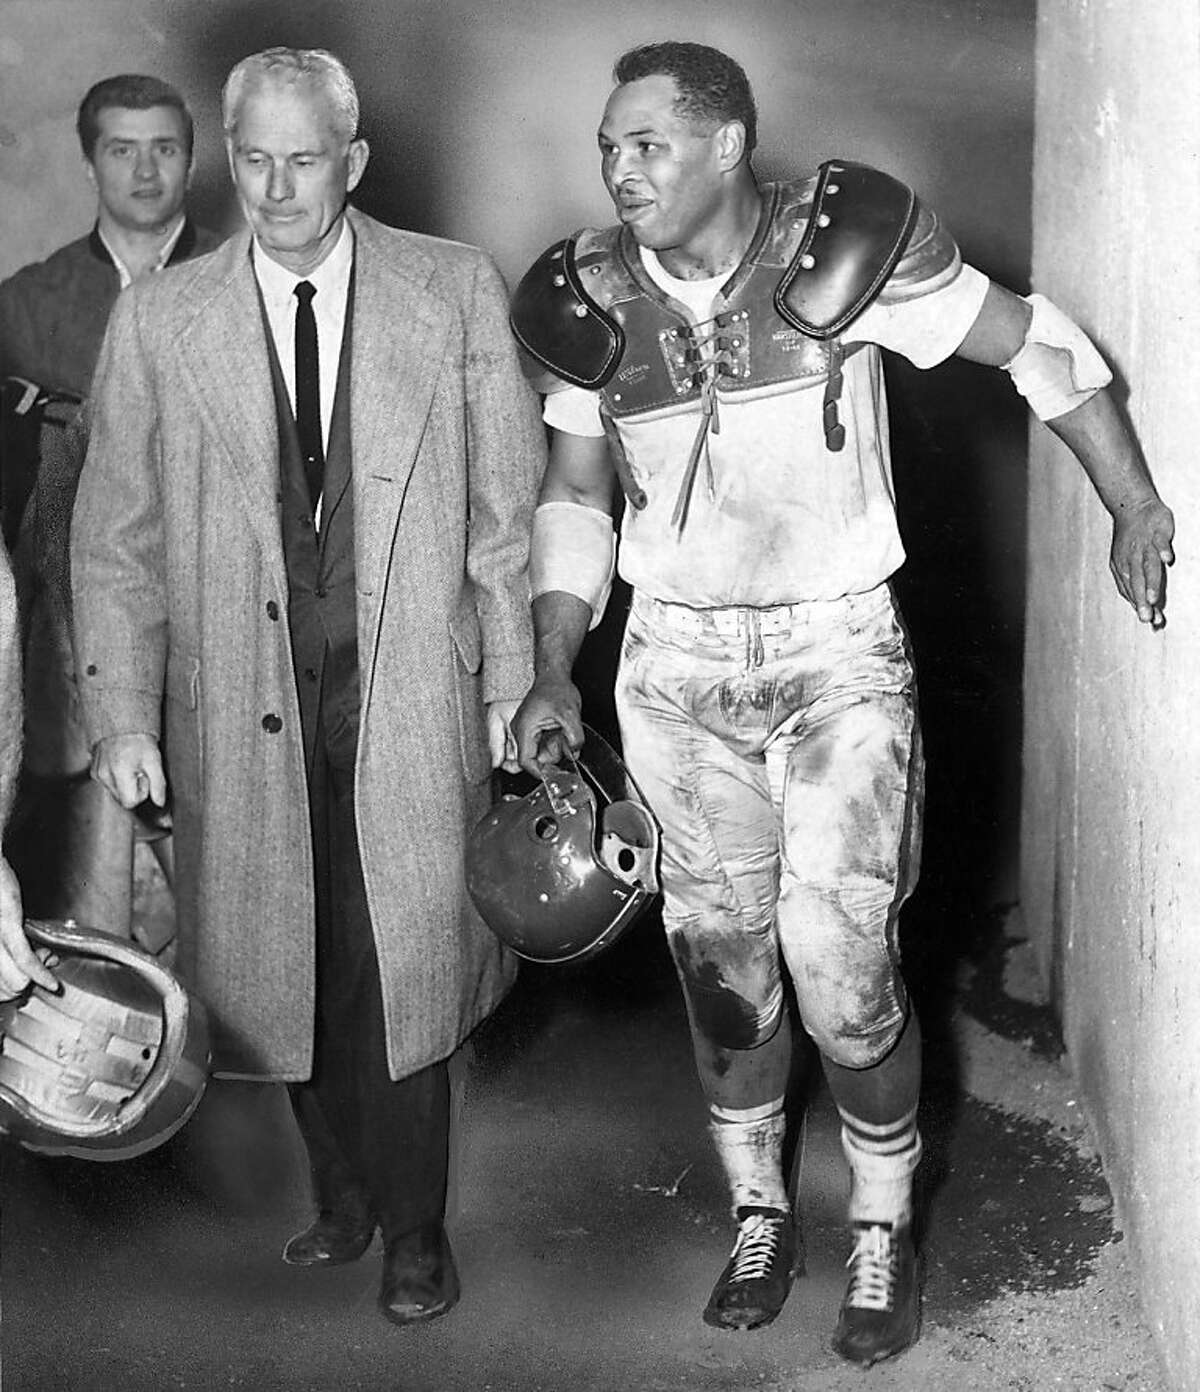 Joe Perry, knows as "The Jet," when he played with the 49ers, is shown in this 1954 photo with 49ers coach, Buck Shaw. Perry died in Arizona of complications from dementia. He was 84. The Hall of Fame fullback was the first player with back-to-back 1,000Joe Perry, knows as "The Jet," when he played with the 49ers, is shown in this 1954 photo with 49ers coach, Buck Shaw. Perry died in Arizona of complications from dementia. He was 84. The Hall of Fame fullback was the first player with back-to-back 1,000-yard rushing seasons and nicknamed "The Jet" for his speed. Photo was taken 12/11/1954.